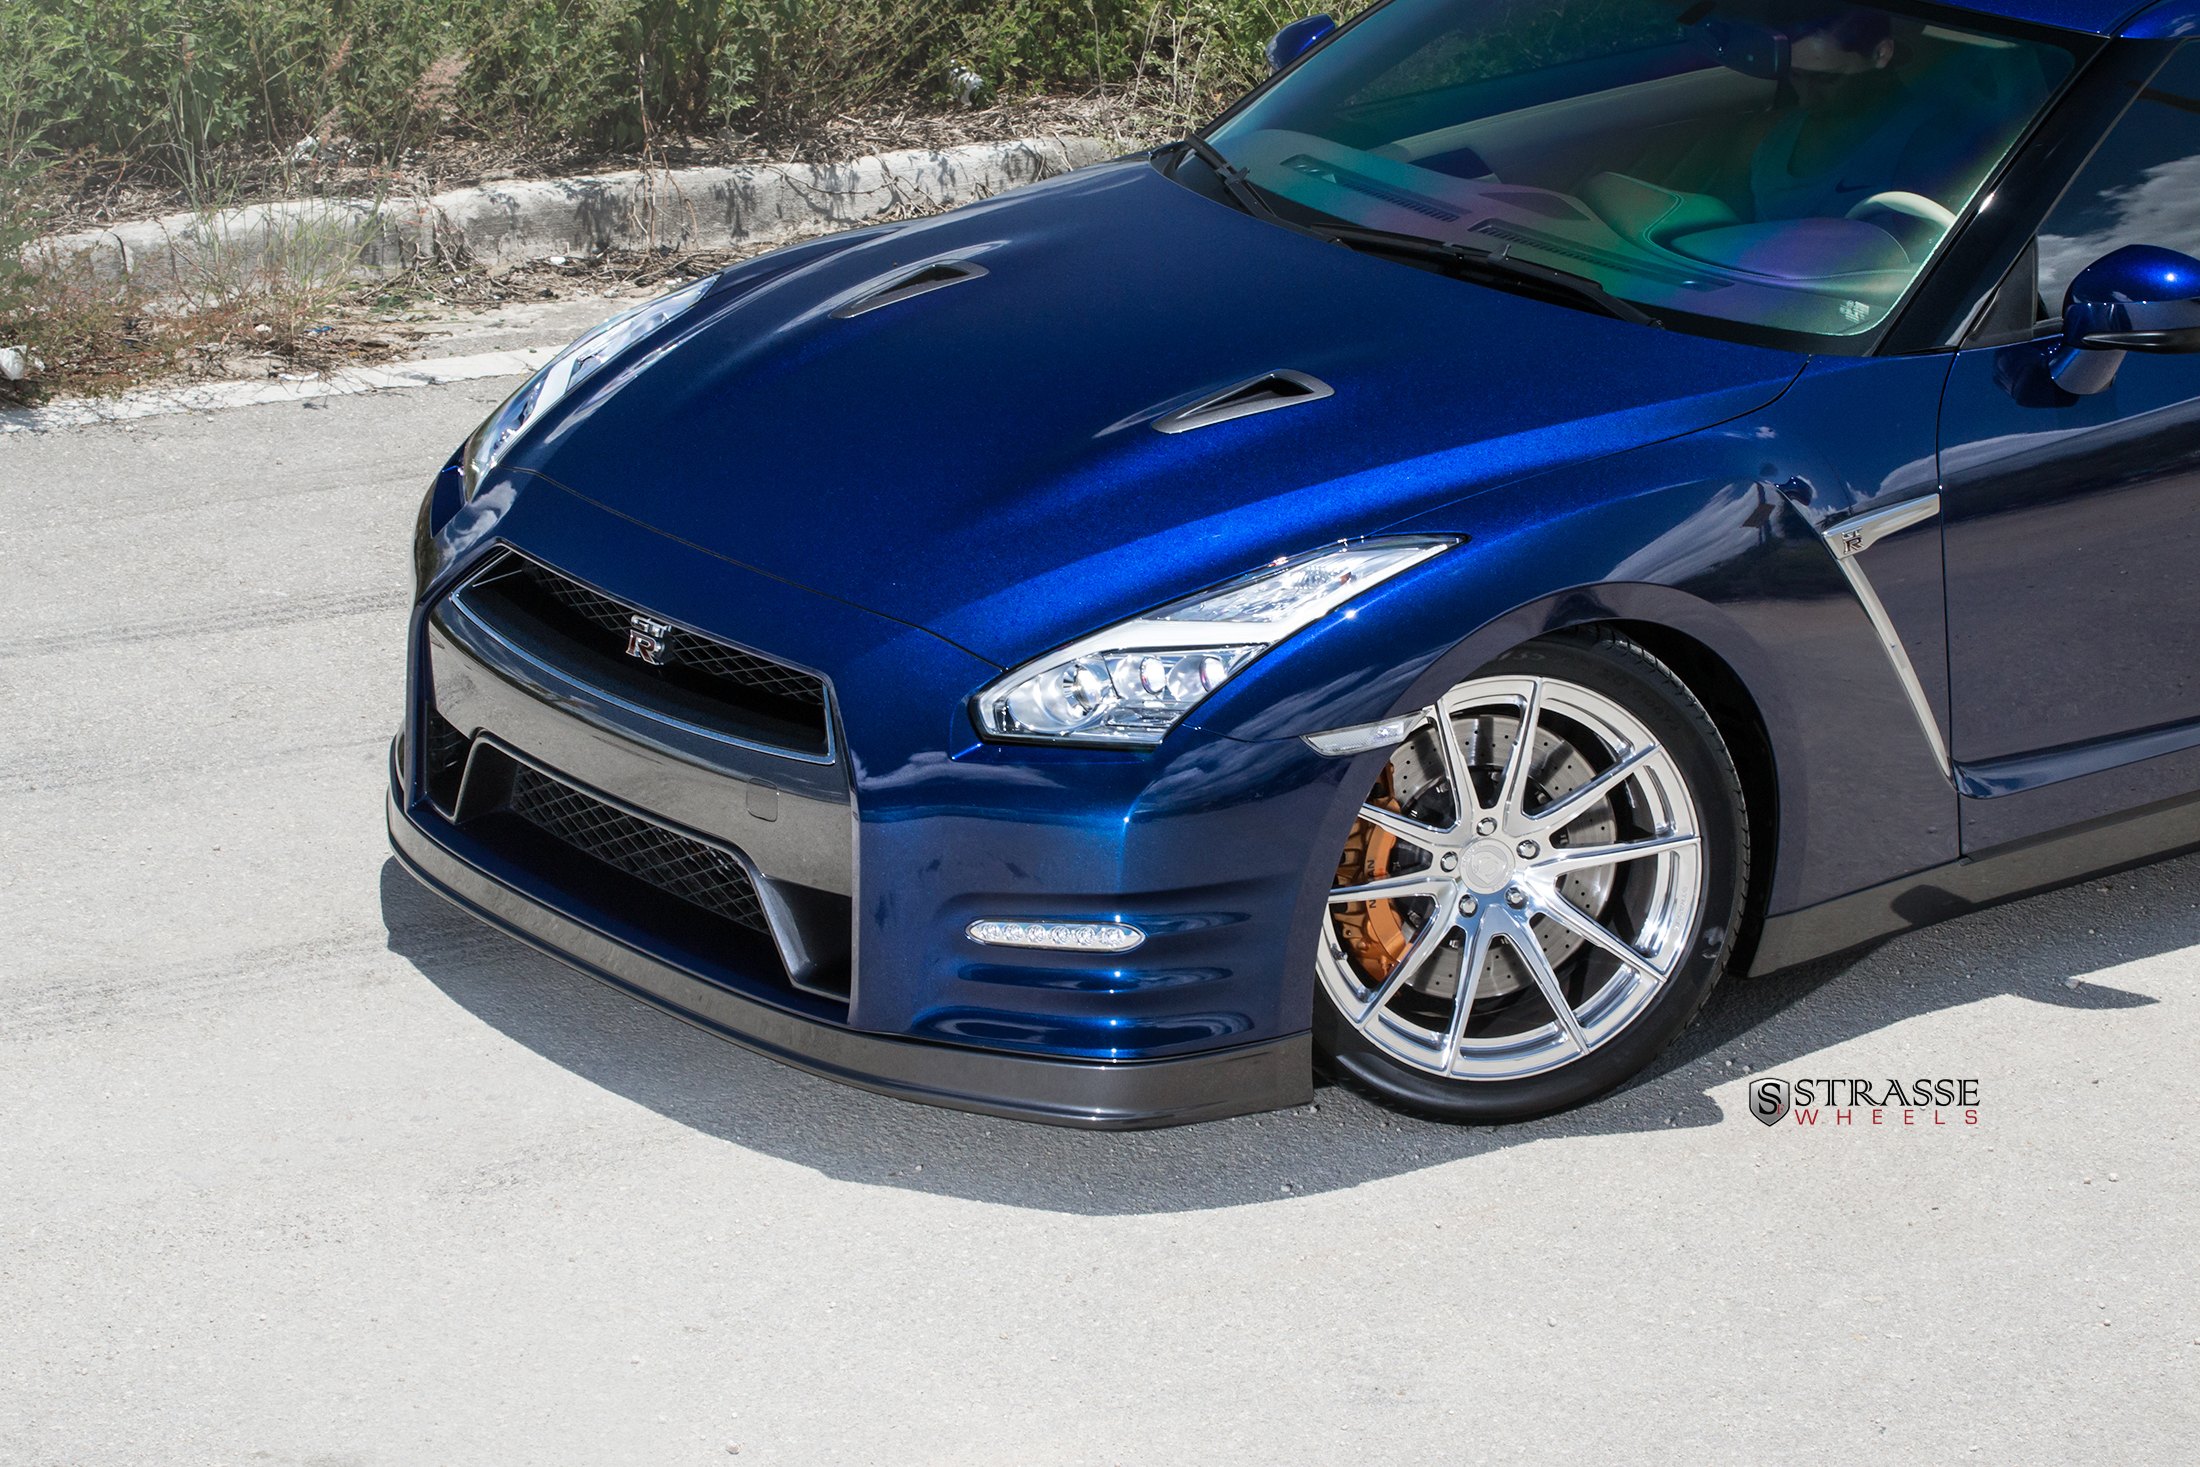 Custom Forged Strasse Wheels on Blue Nissan GT-R - Photo by Strasse Forged